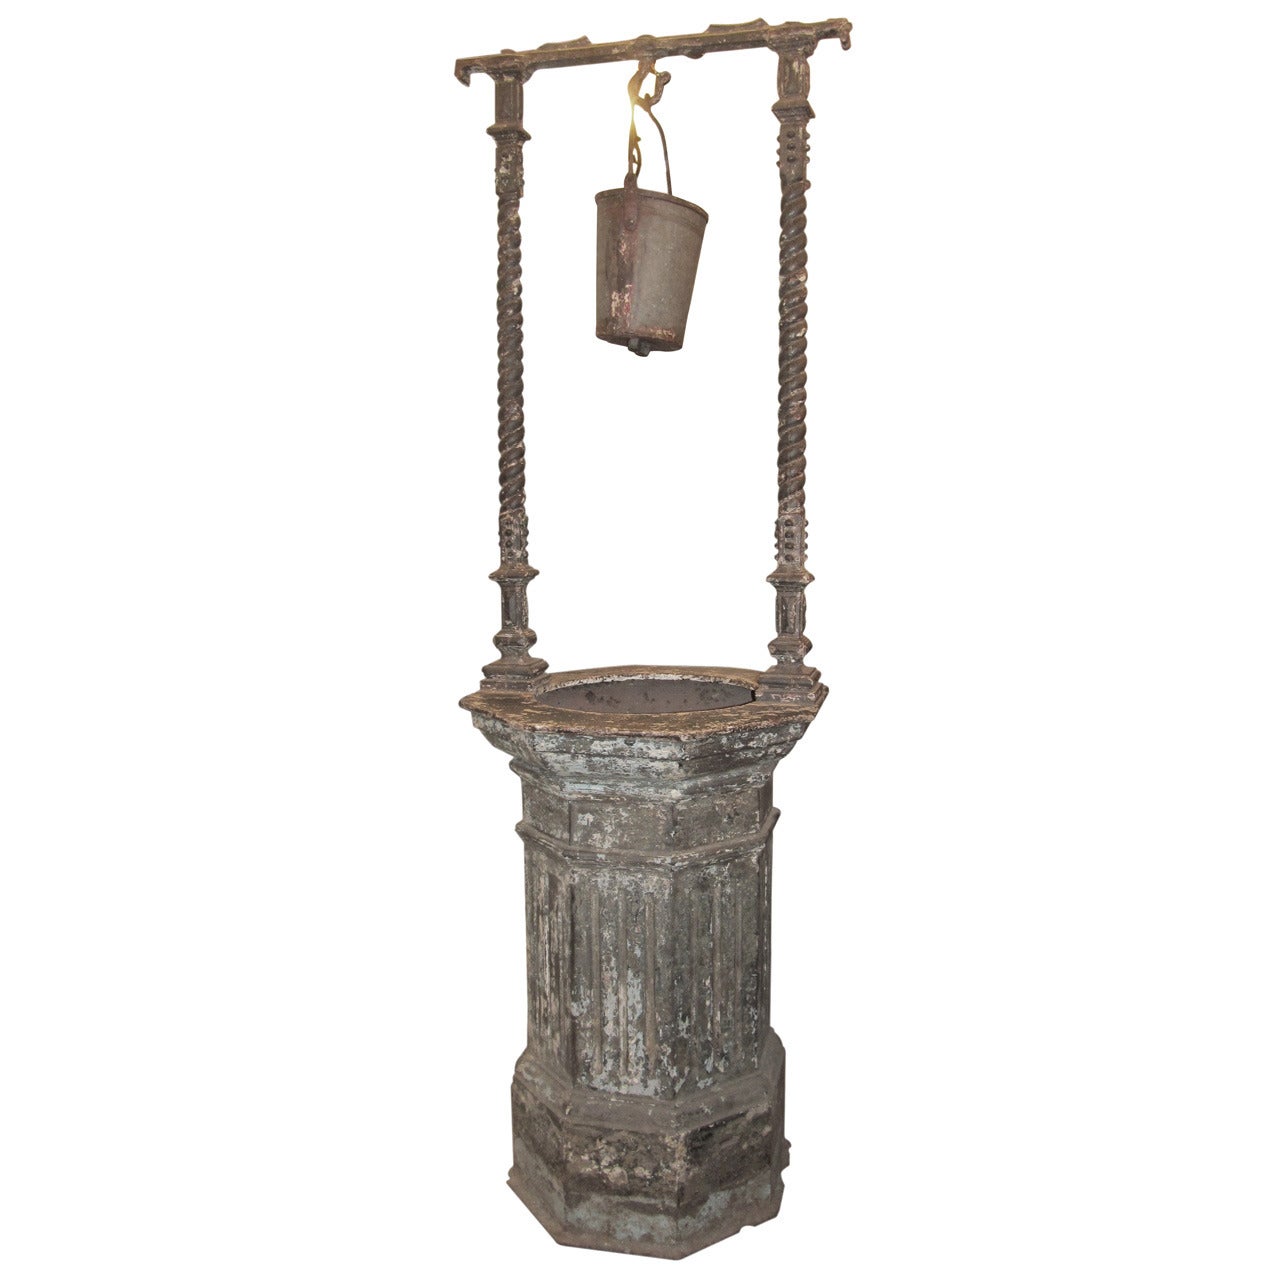 Early 1900s Victorian Cast Iron Antique Standing Wishing Well